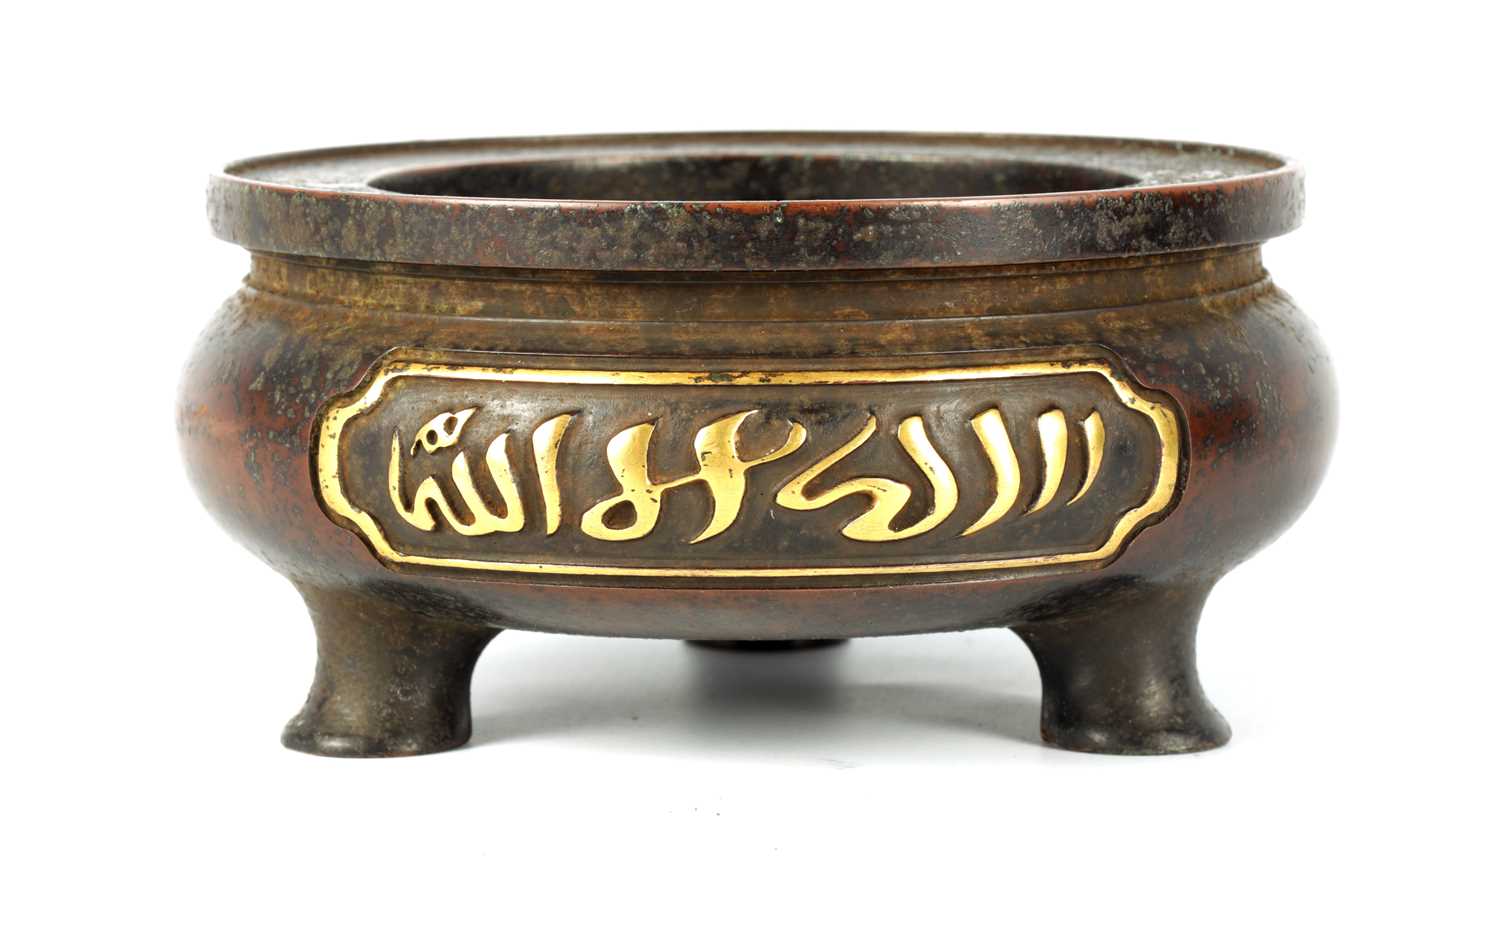 Lot 102 - AN EARLY CHINESE PATINATED BRONZE CENSER WITH ARABIC SCRIPT